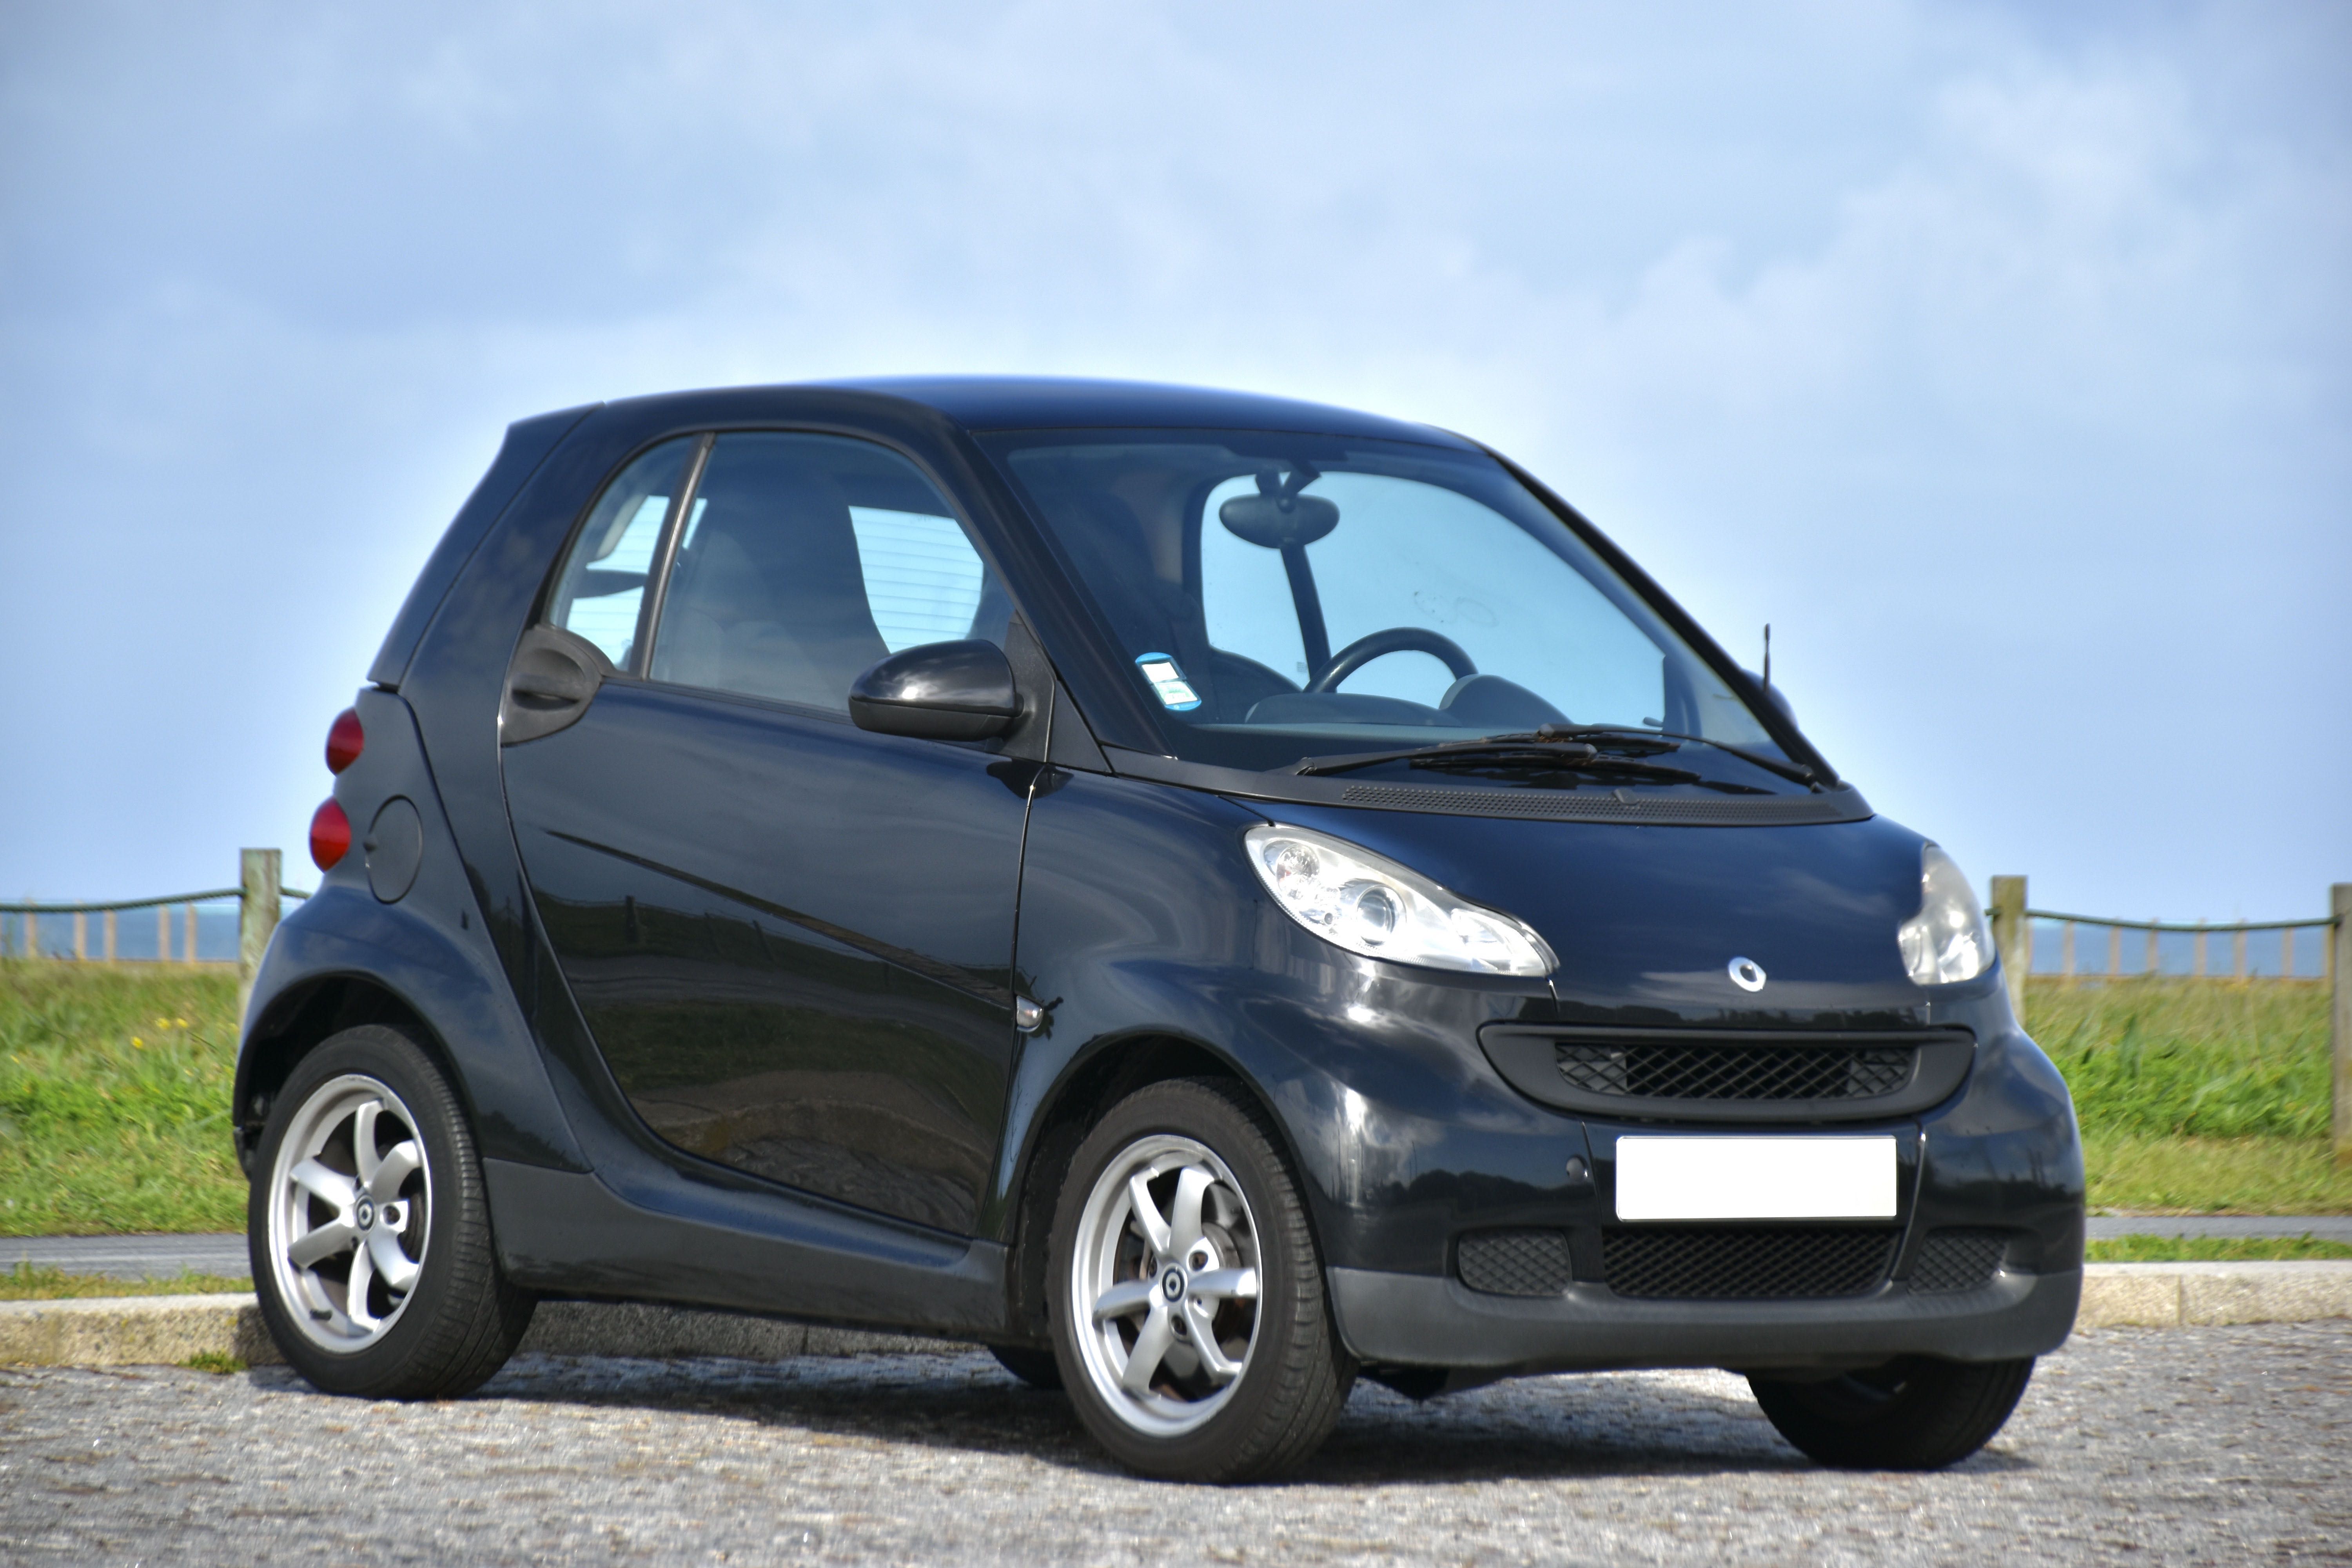 Smart Fortwo 0.8 cdi - Desde 70€ /mês